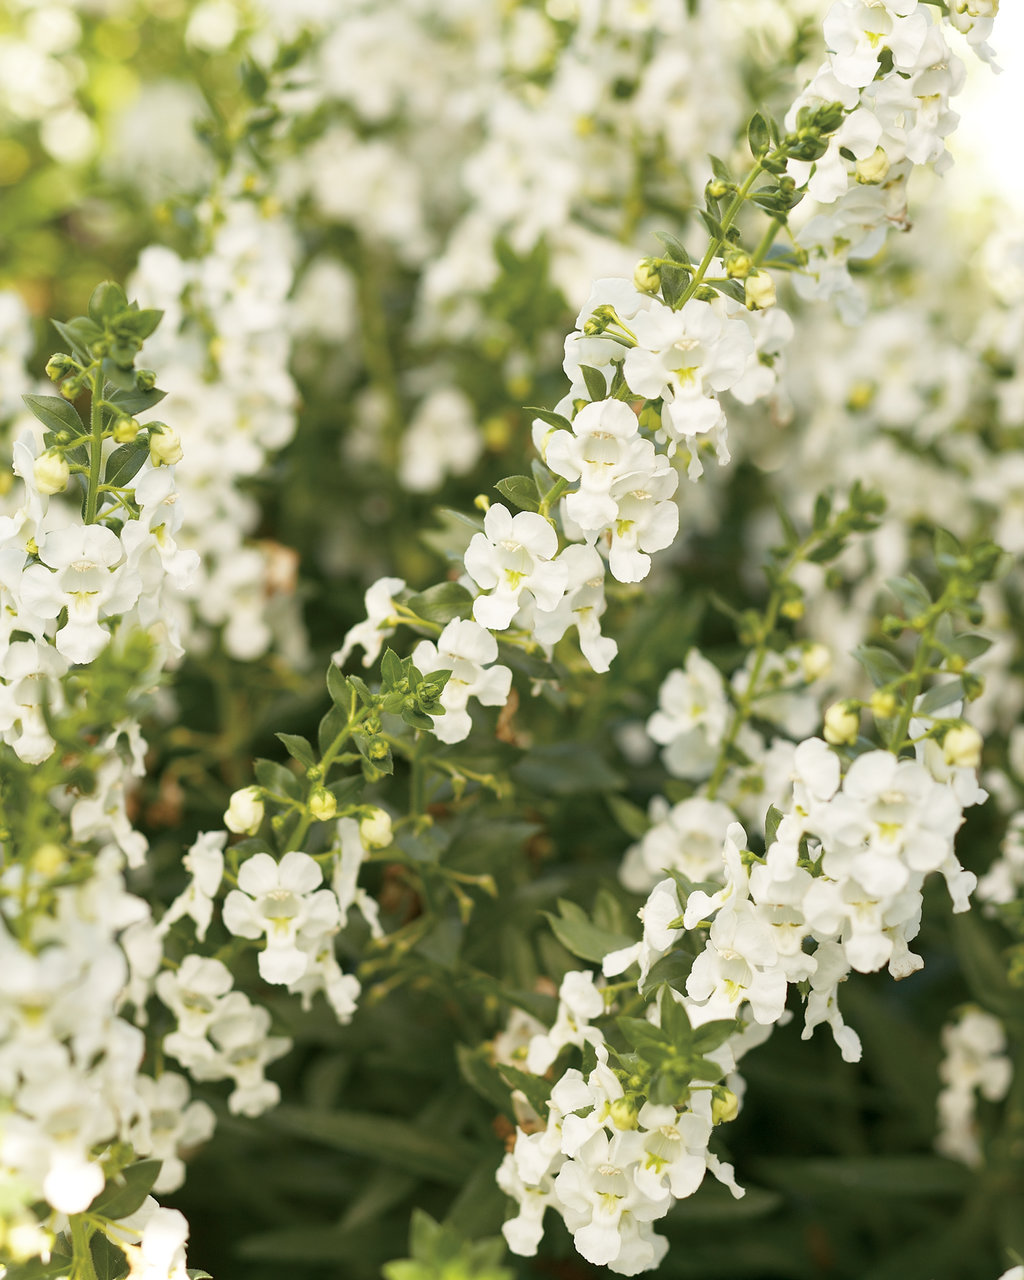 Angelface White Summer Snapdragon Angelonia Angustifolia Hybrid Proven Winners